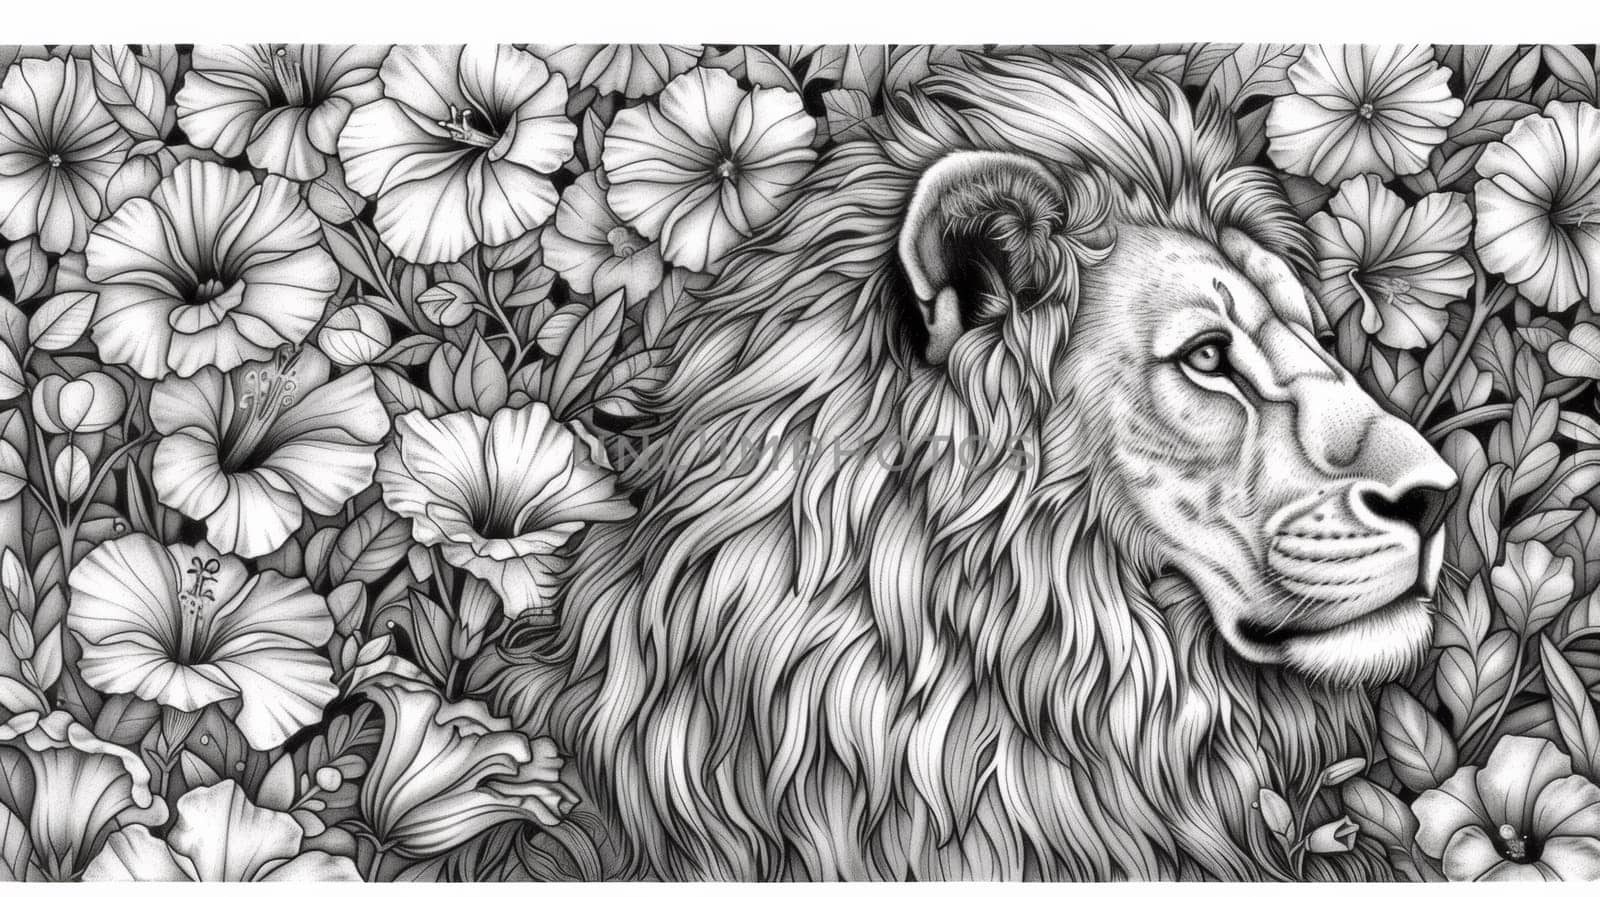 A black and white drawing of a lion surrounded by flowers